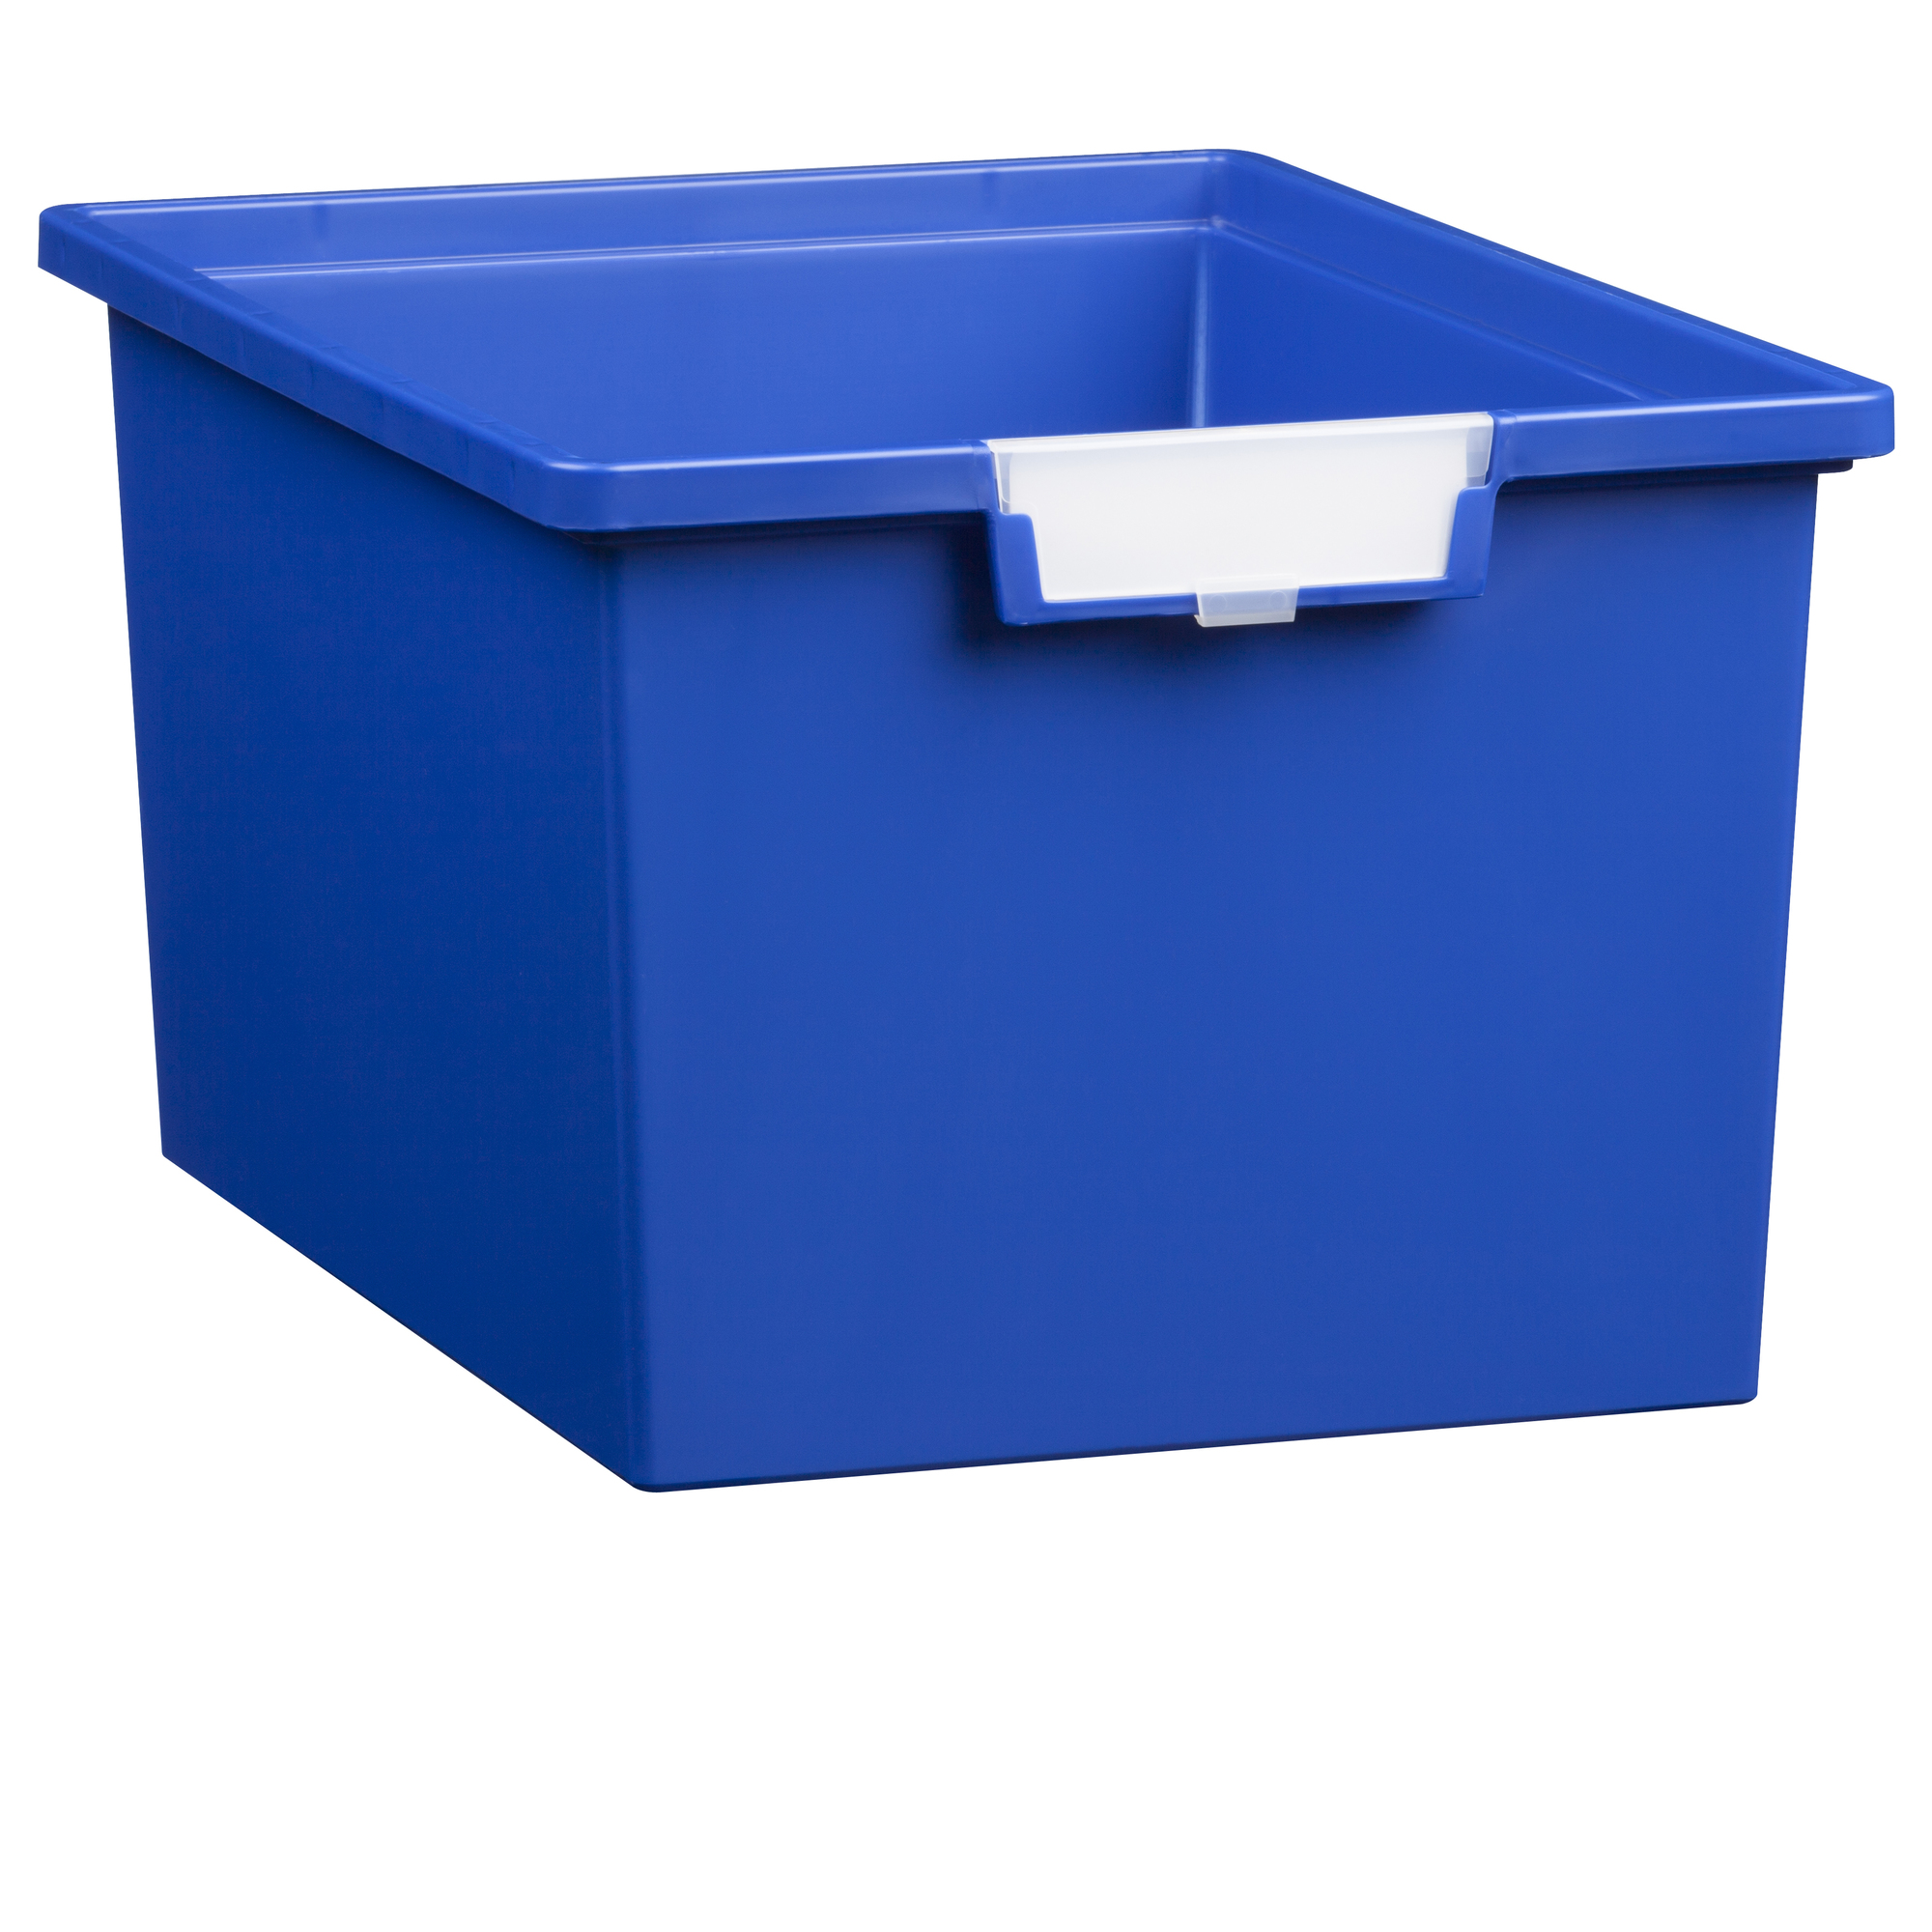 Certwood StorWerks, Slim Line 9Inch Tray in Primary Blue-1PK, Included (qty.) 1 Height 9 in, Model CE1953PB1